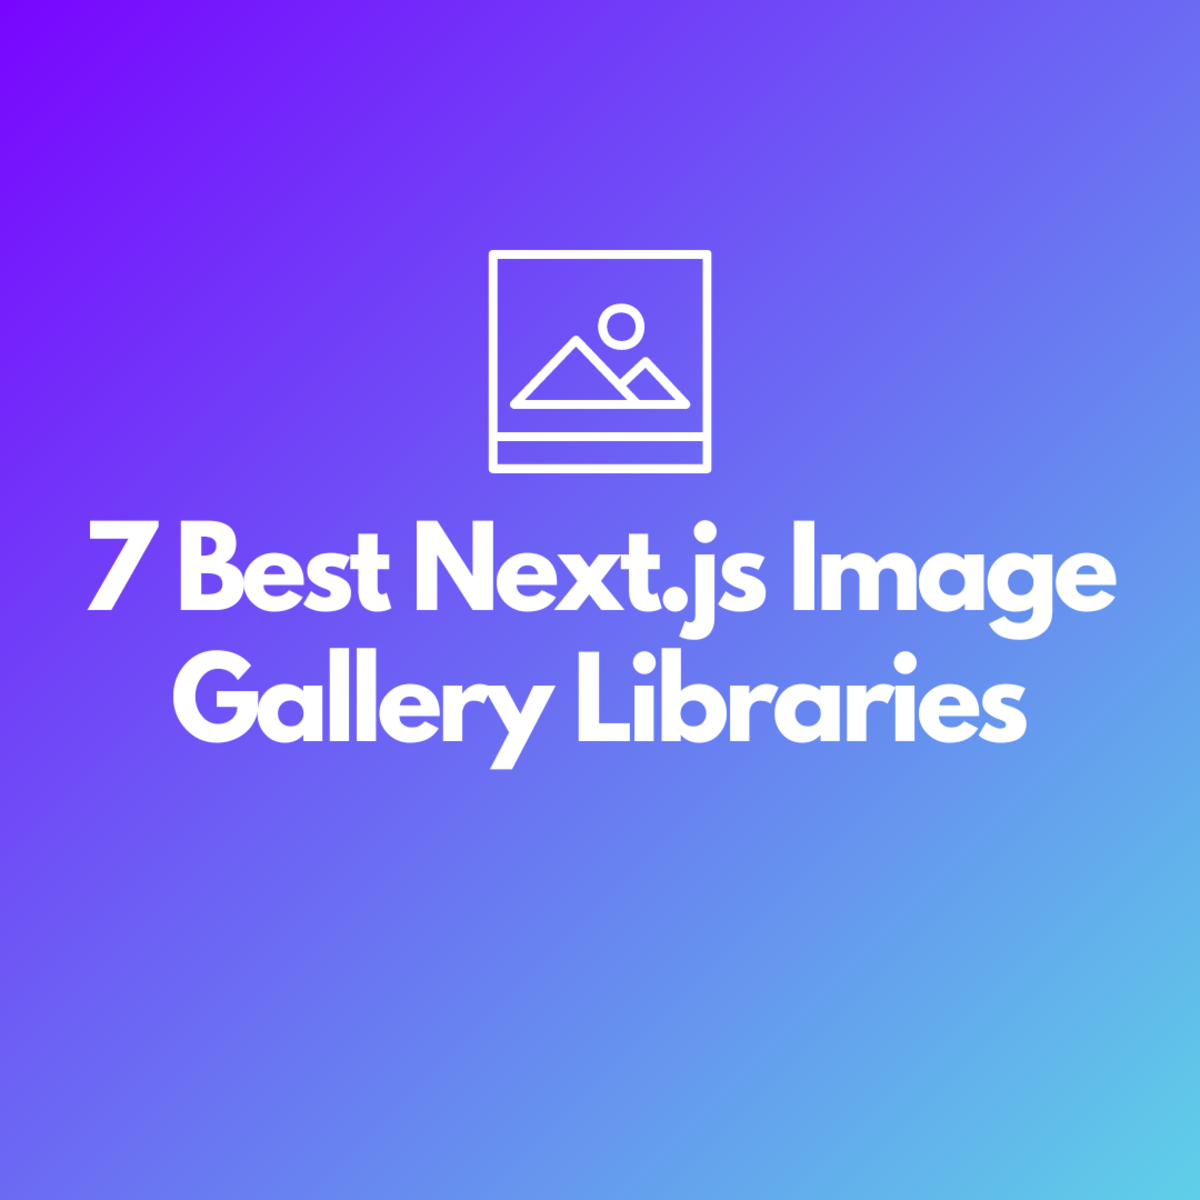 7 Best Next.js Image Gallery Libraries: The Ultimate List